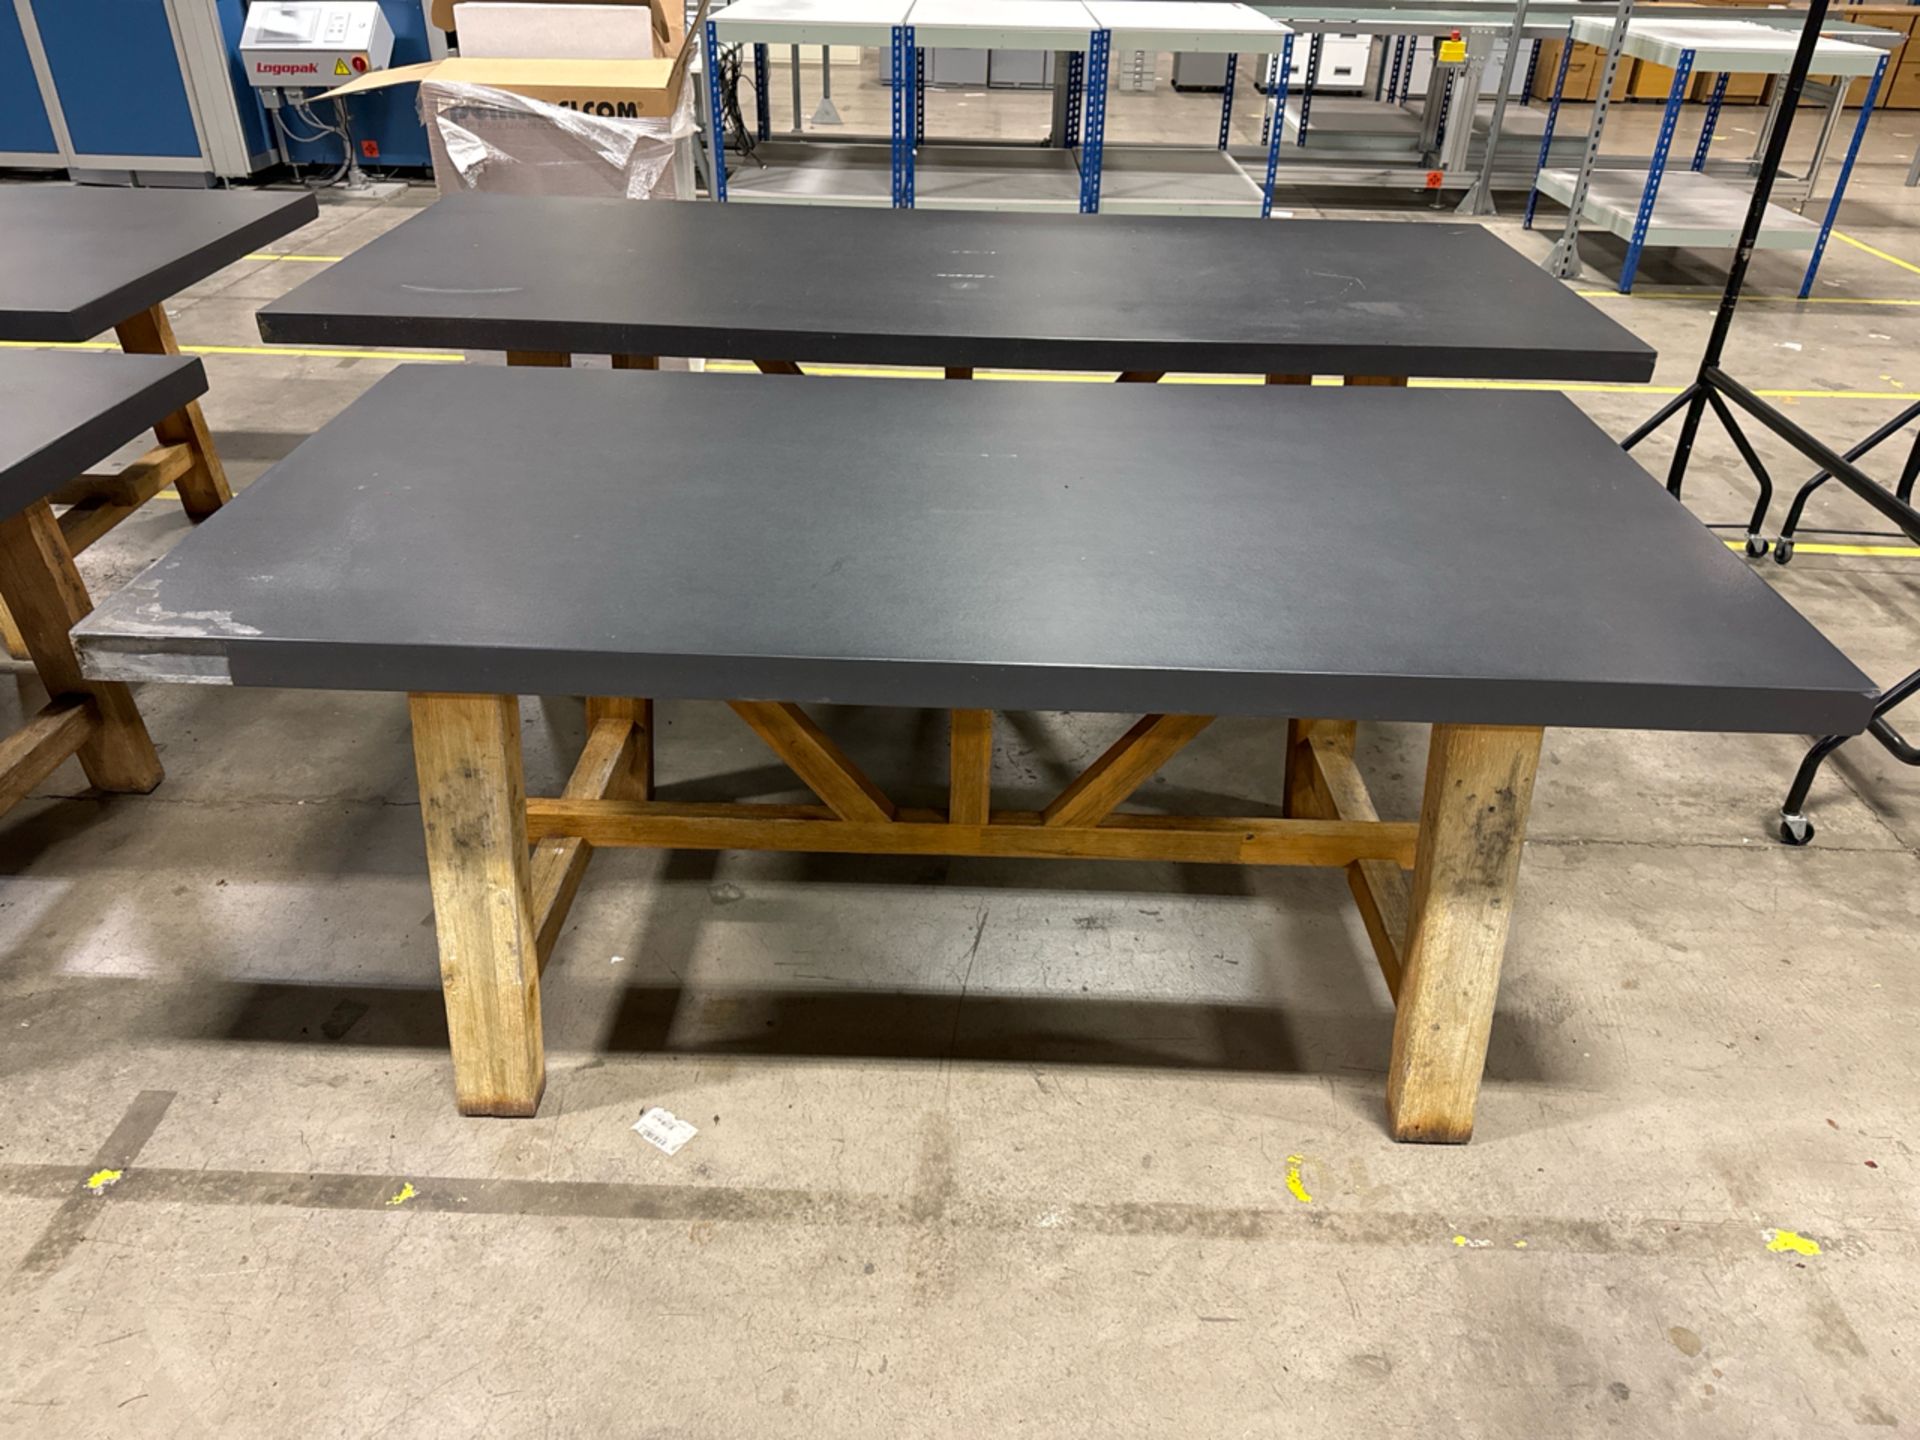 Black Wooden Tables With Vinyl Finish x4